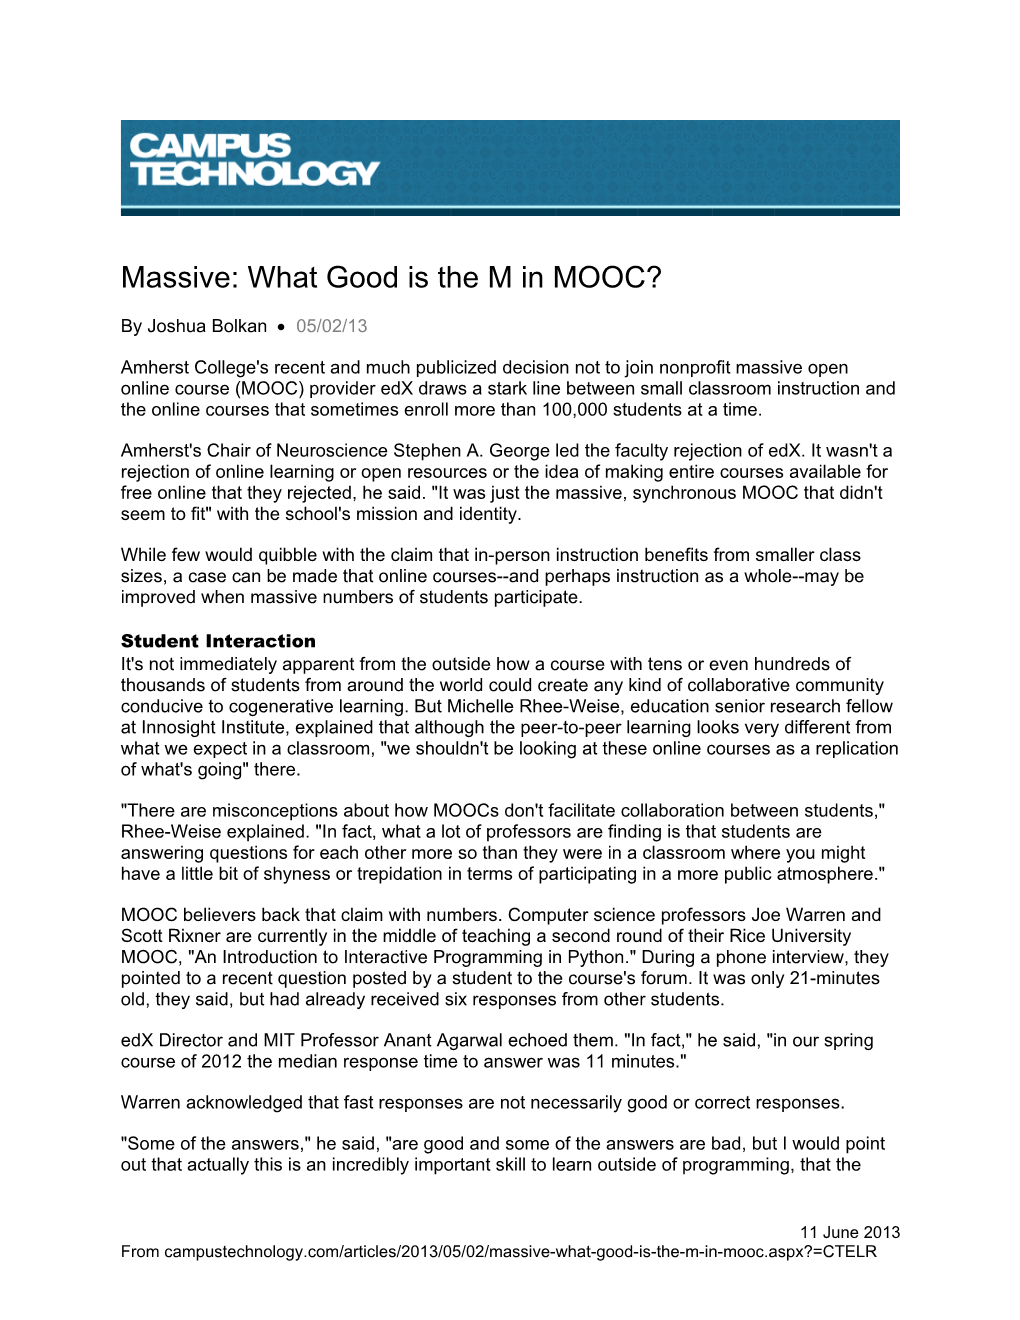 Massive: What Good Is the M in MOOC?